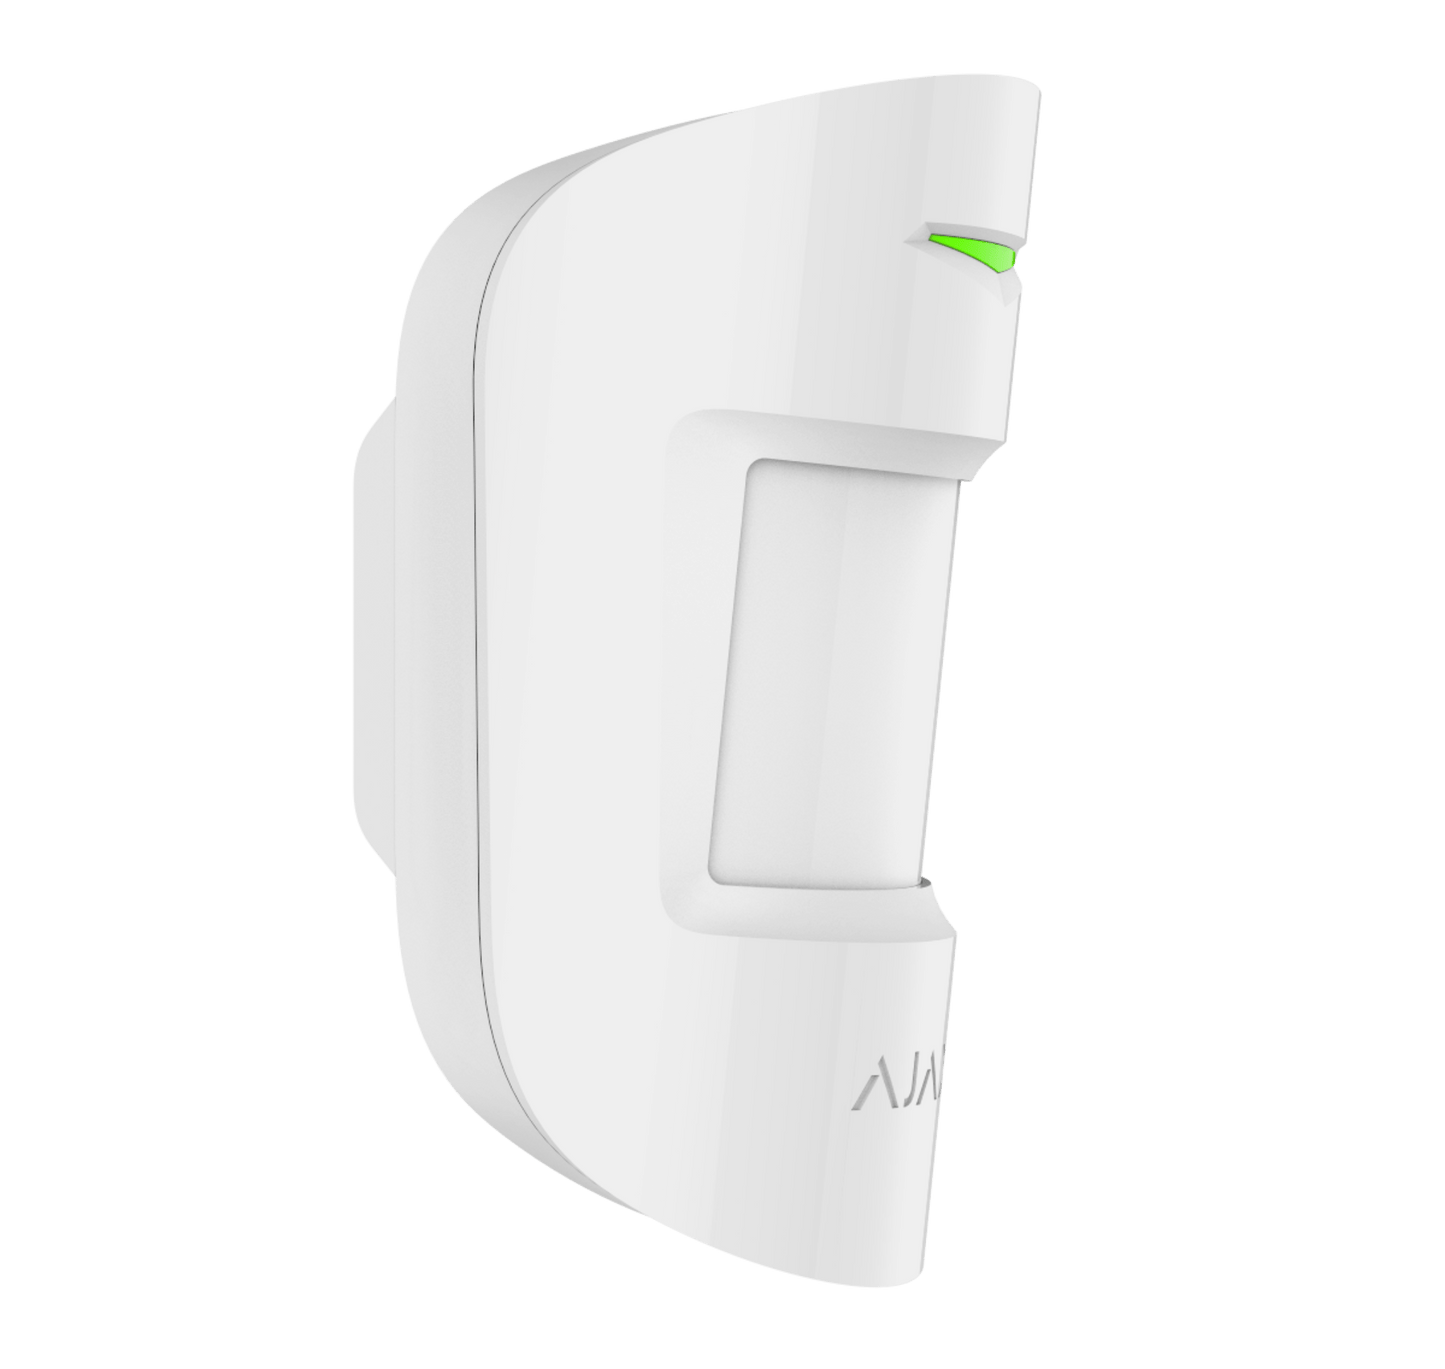 White Ajax MotionProtect plus from Ajax Security Systems, a wireless motion sensor for home and business security. Device is 110 × 65 × 50 mm in size, 96 grams in weight, this is the side view of the device displayed in the image. buy Ajax alarm systems online